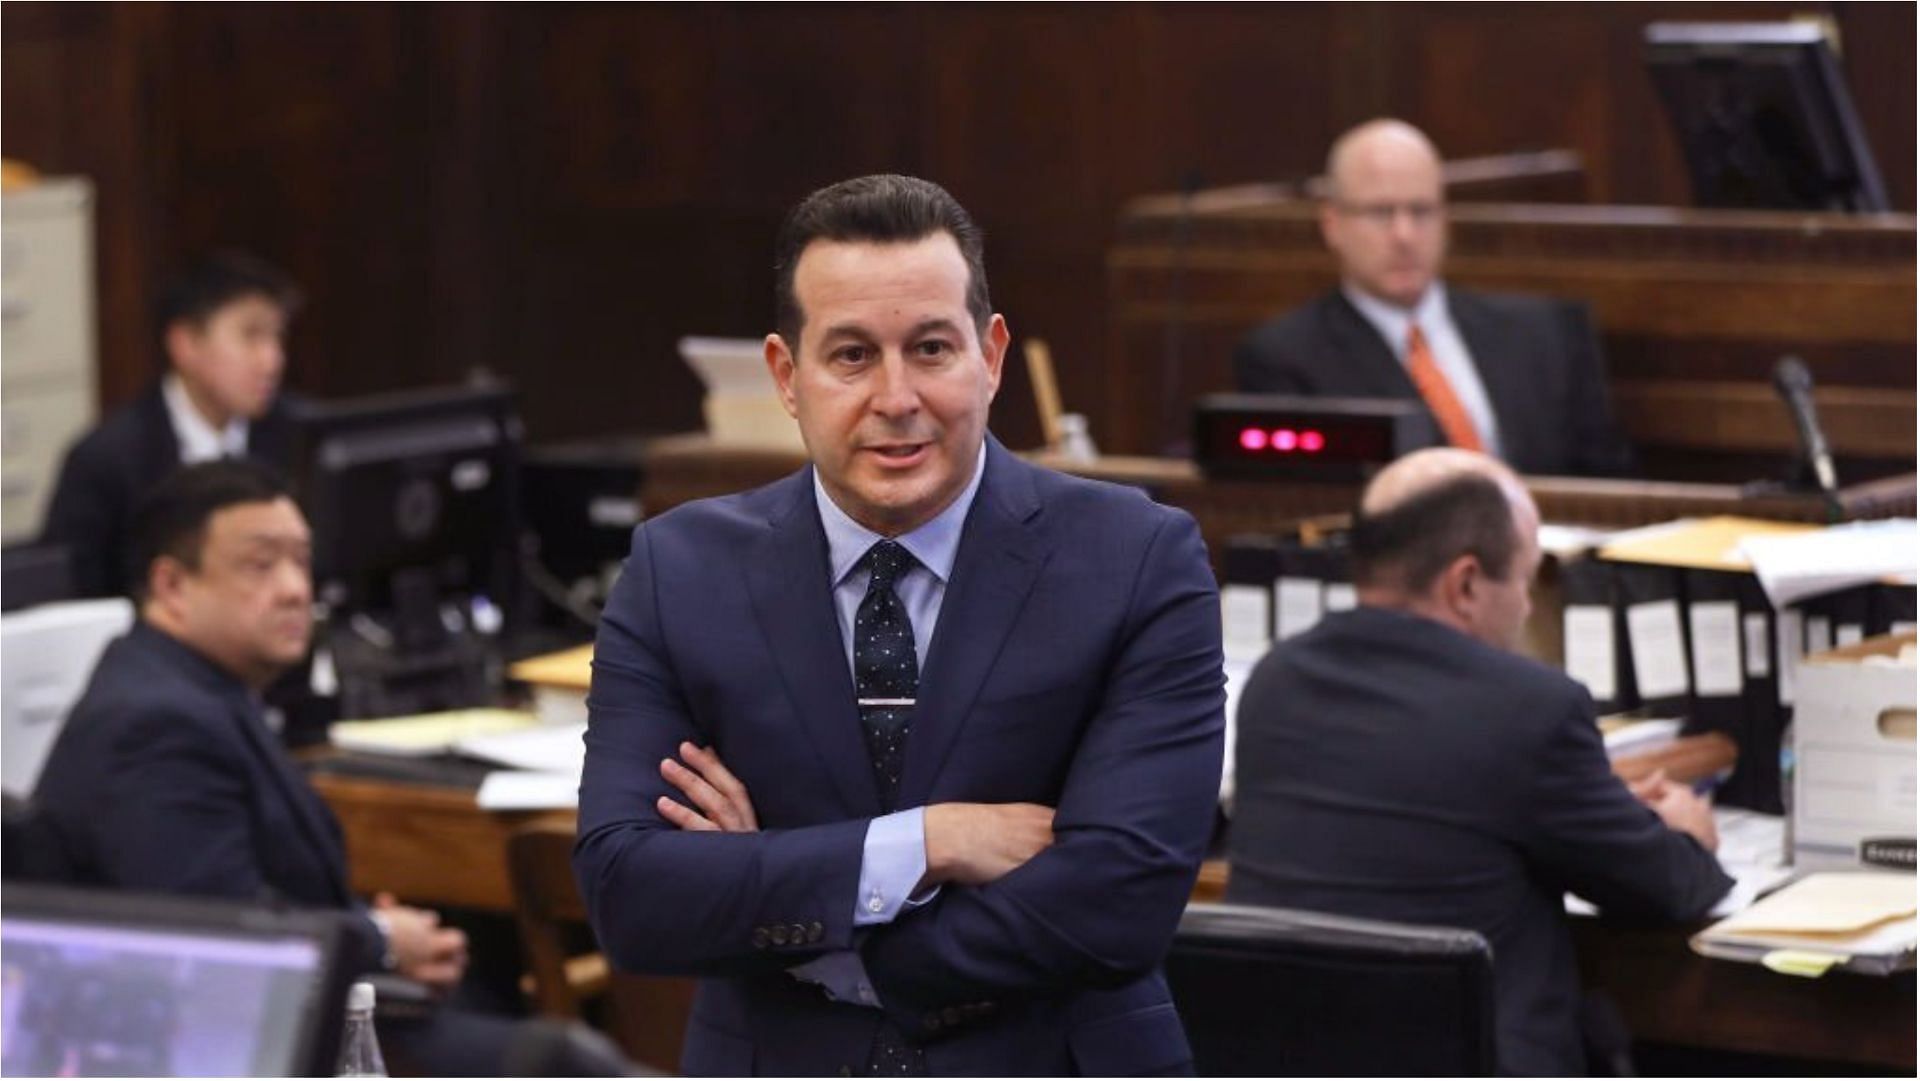 Jose Baez has represented famous personalities as a criminal defense lawyer (Image via Pat Greenhouse/Getty Images)